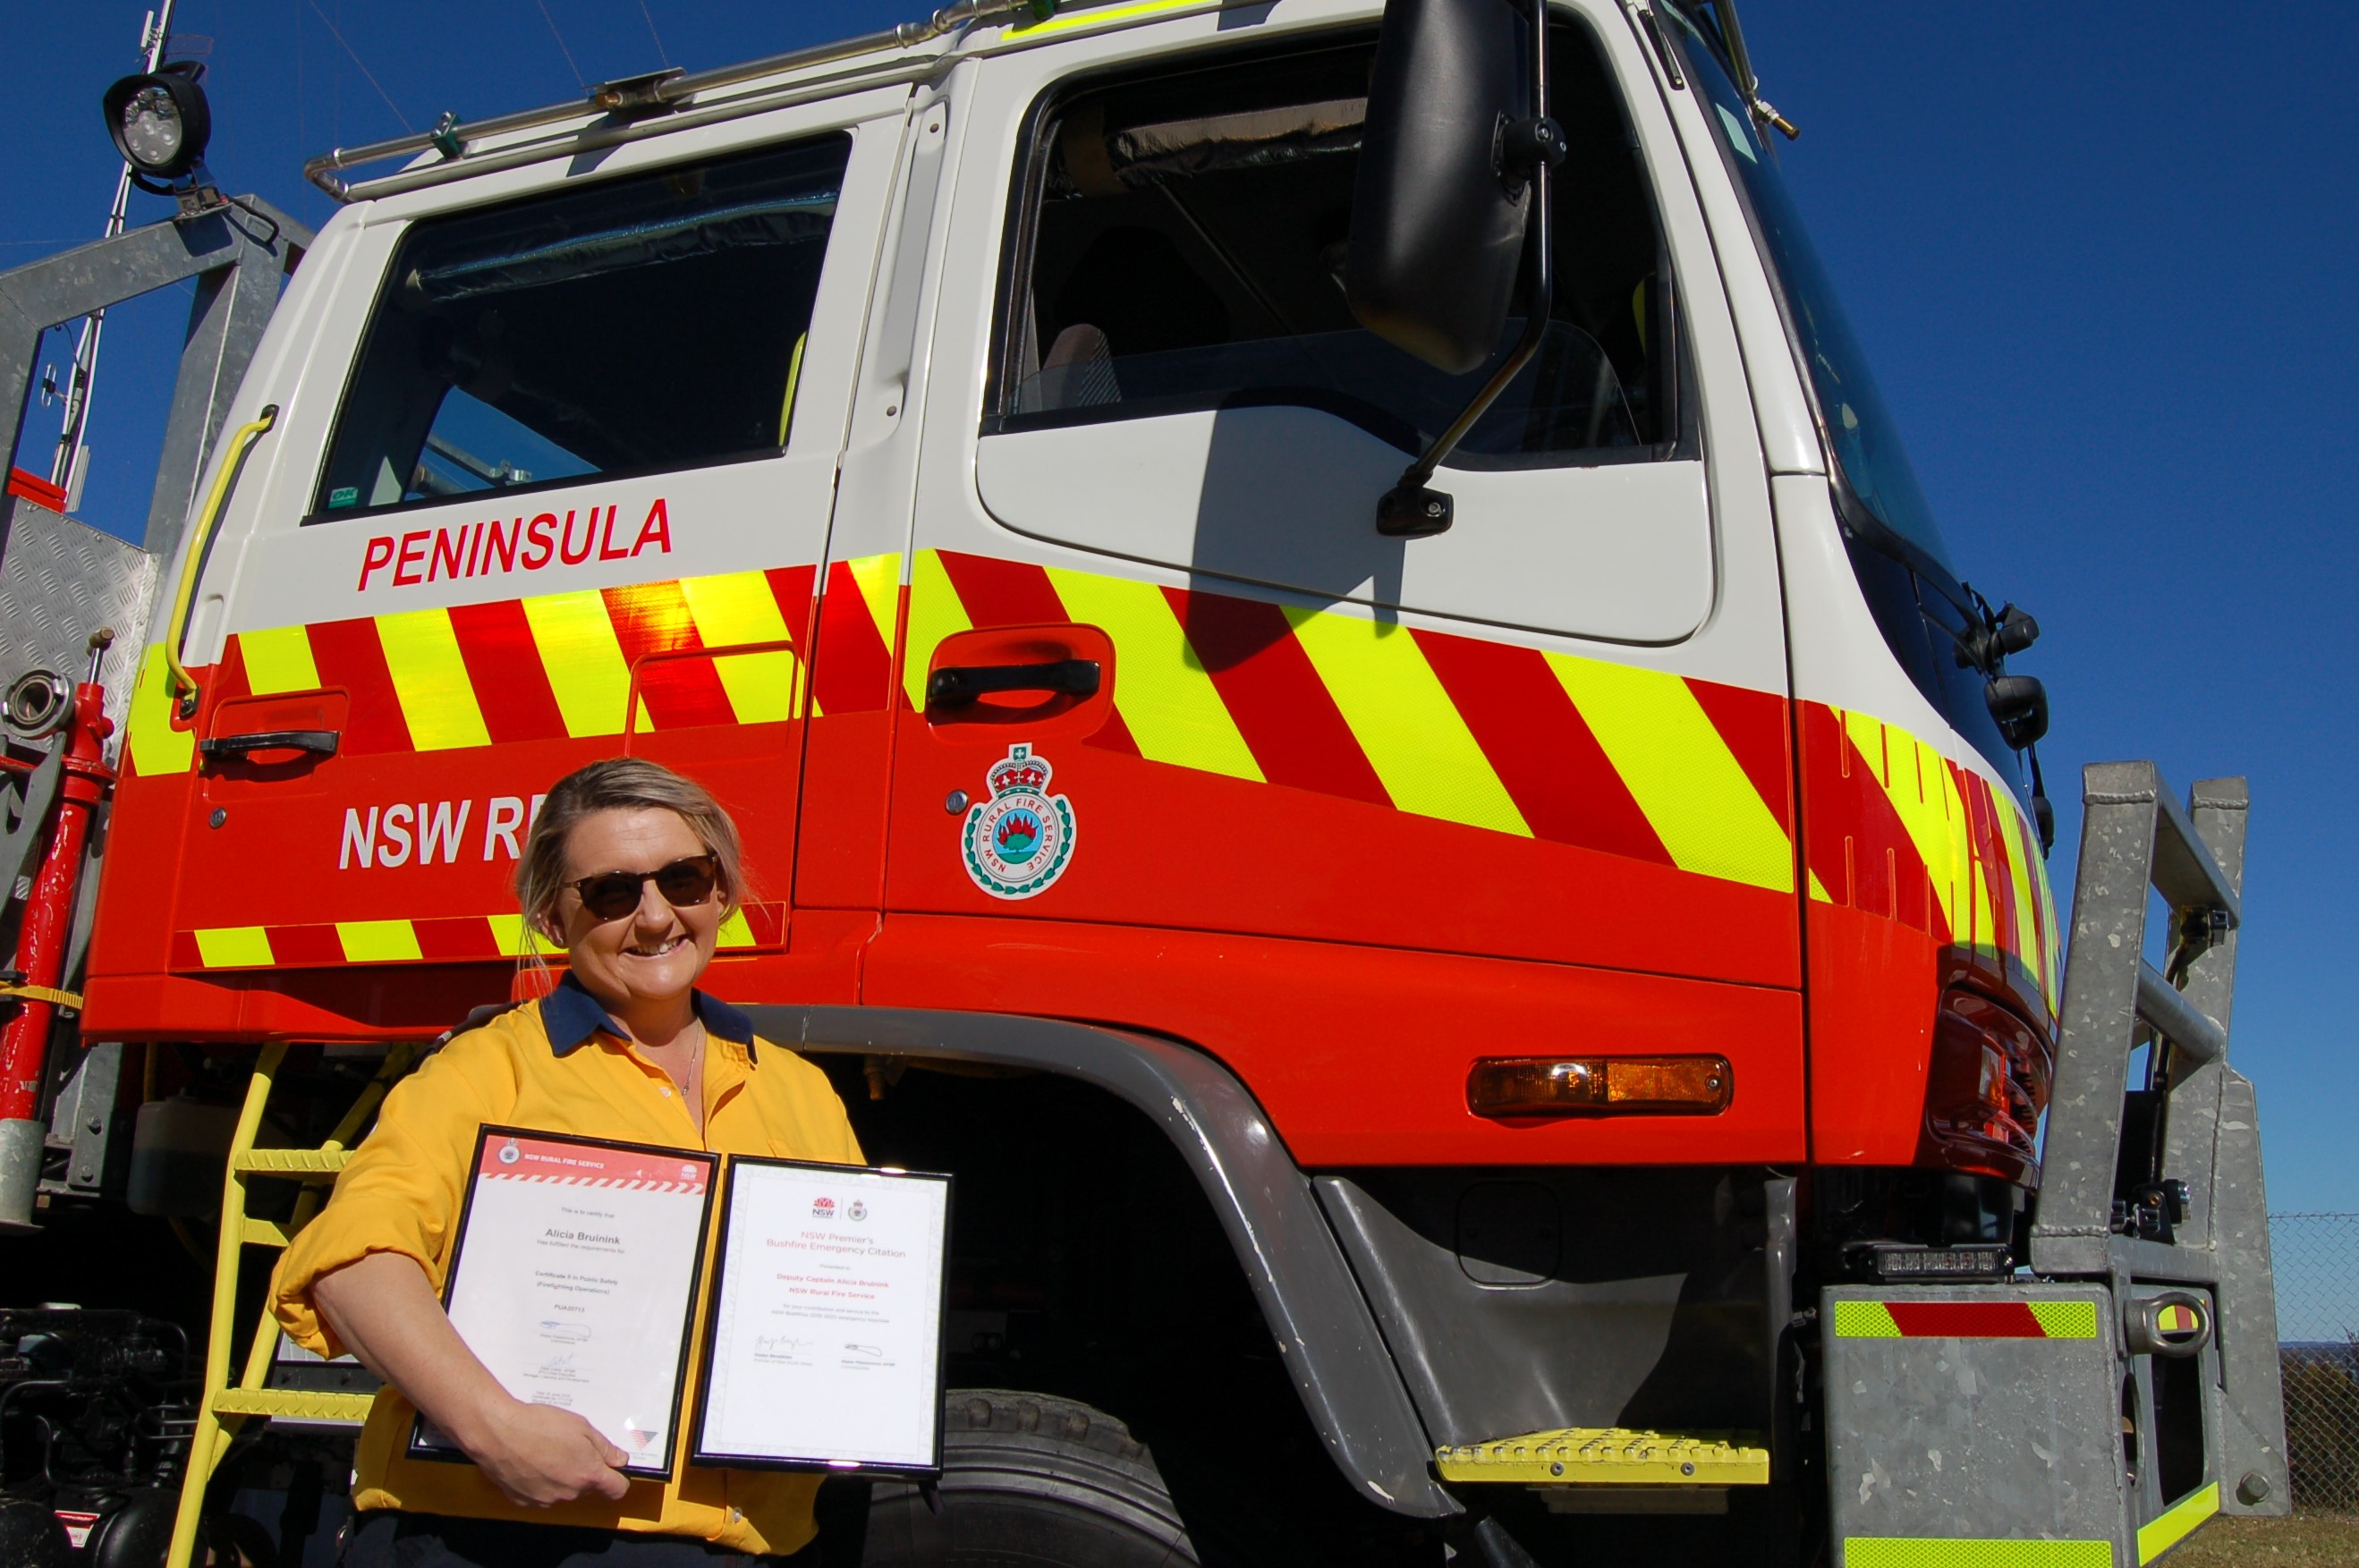 Hume employee Alicia stands in front of a fire engine holding two awards.